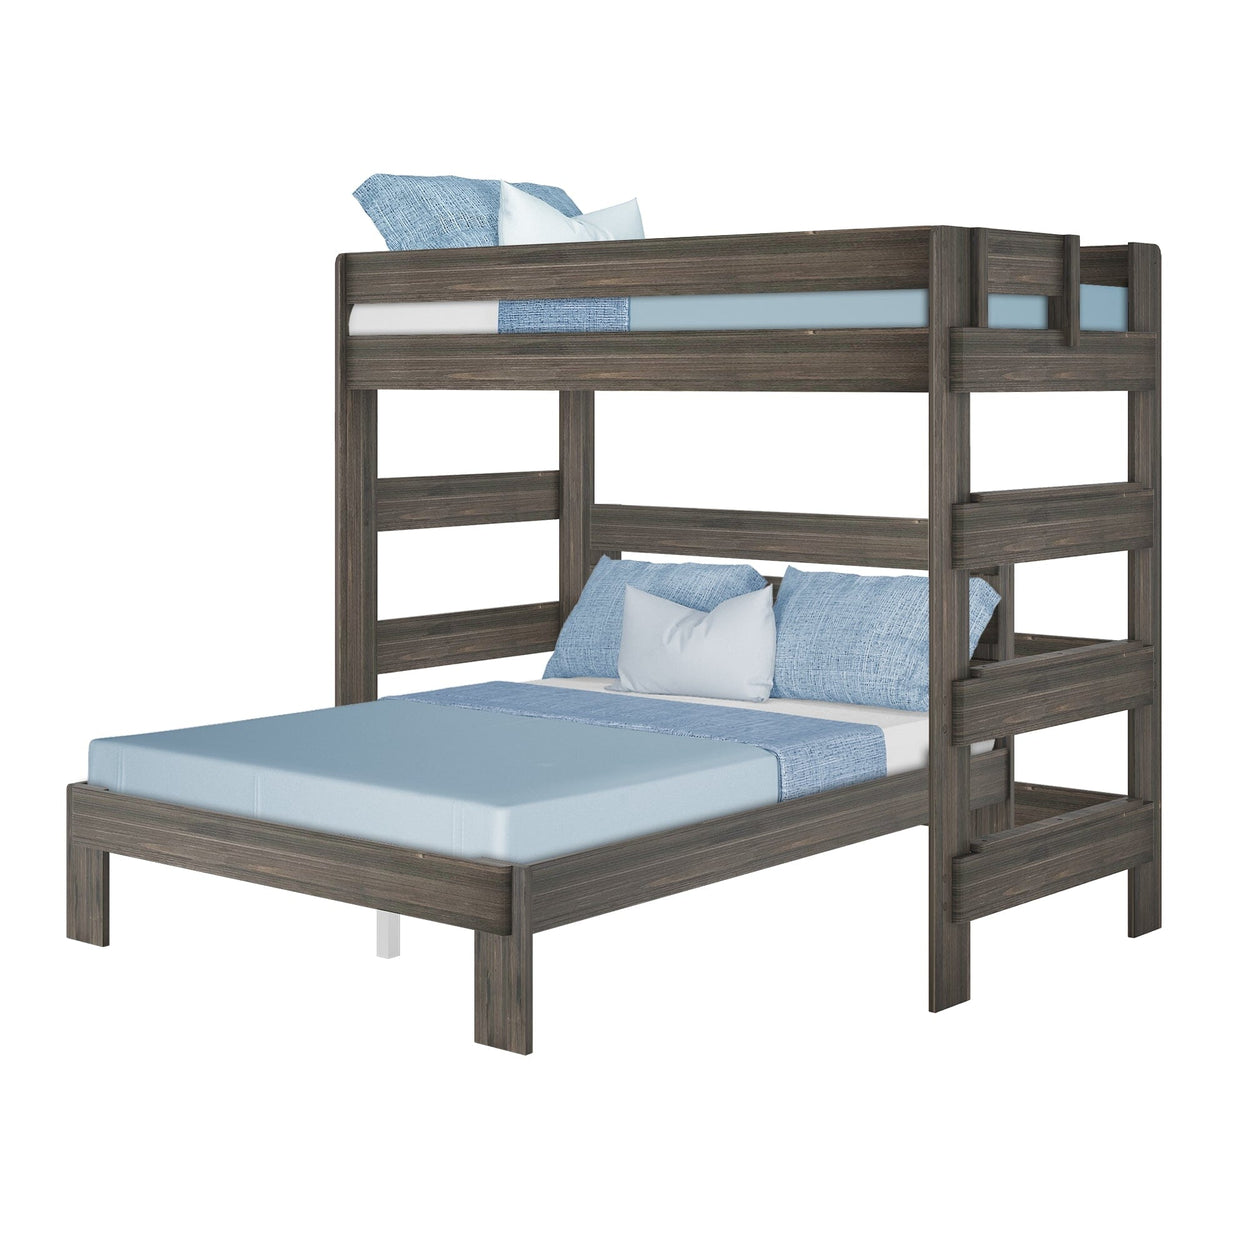 19-813-181 : Bunk Beds Farmhouse Twin over Queen L-Shaped Bunk Bed, Barnwood Brown